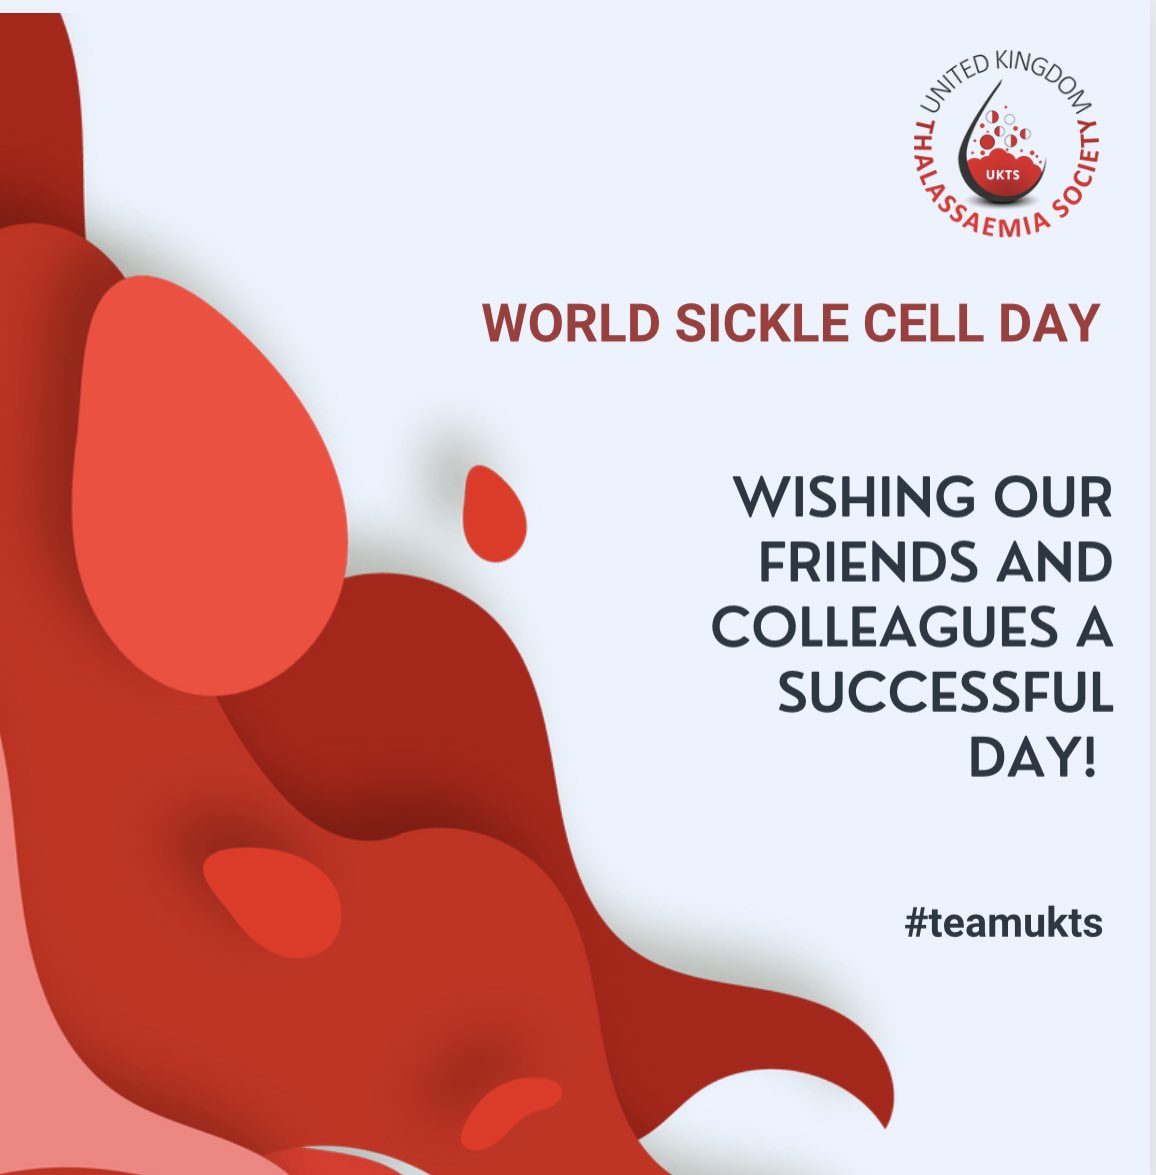 We would like to wish all celebrating & raising awareness a happy #WorldSickleCellDay.

We are committed to raising awareness and advocating for better healthcare for those living with #thalassaemia and other inherited blood disorders.

Here's to a happier and healthier future!